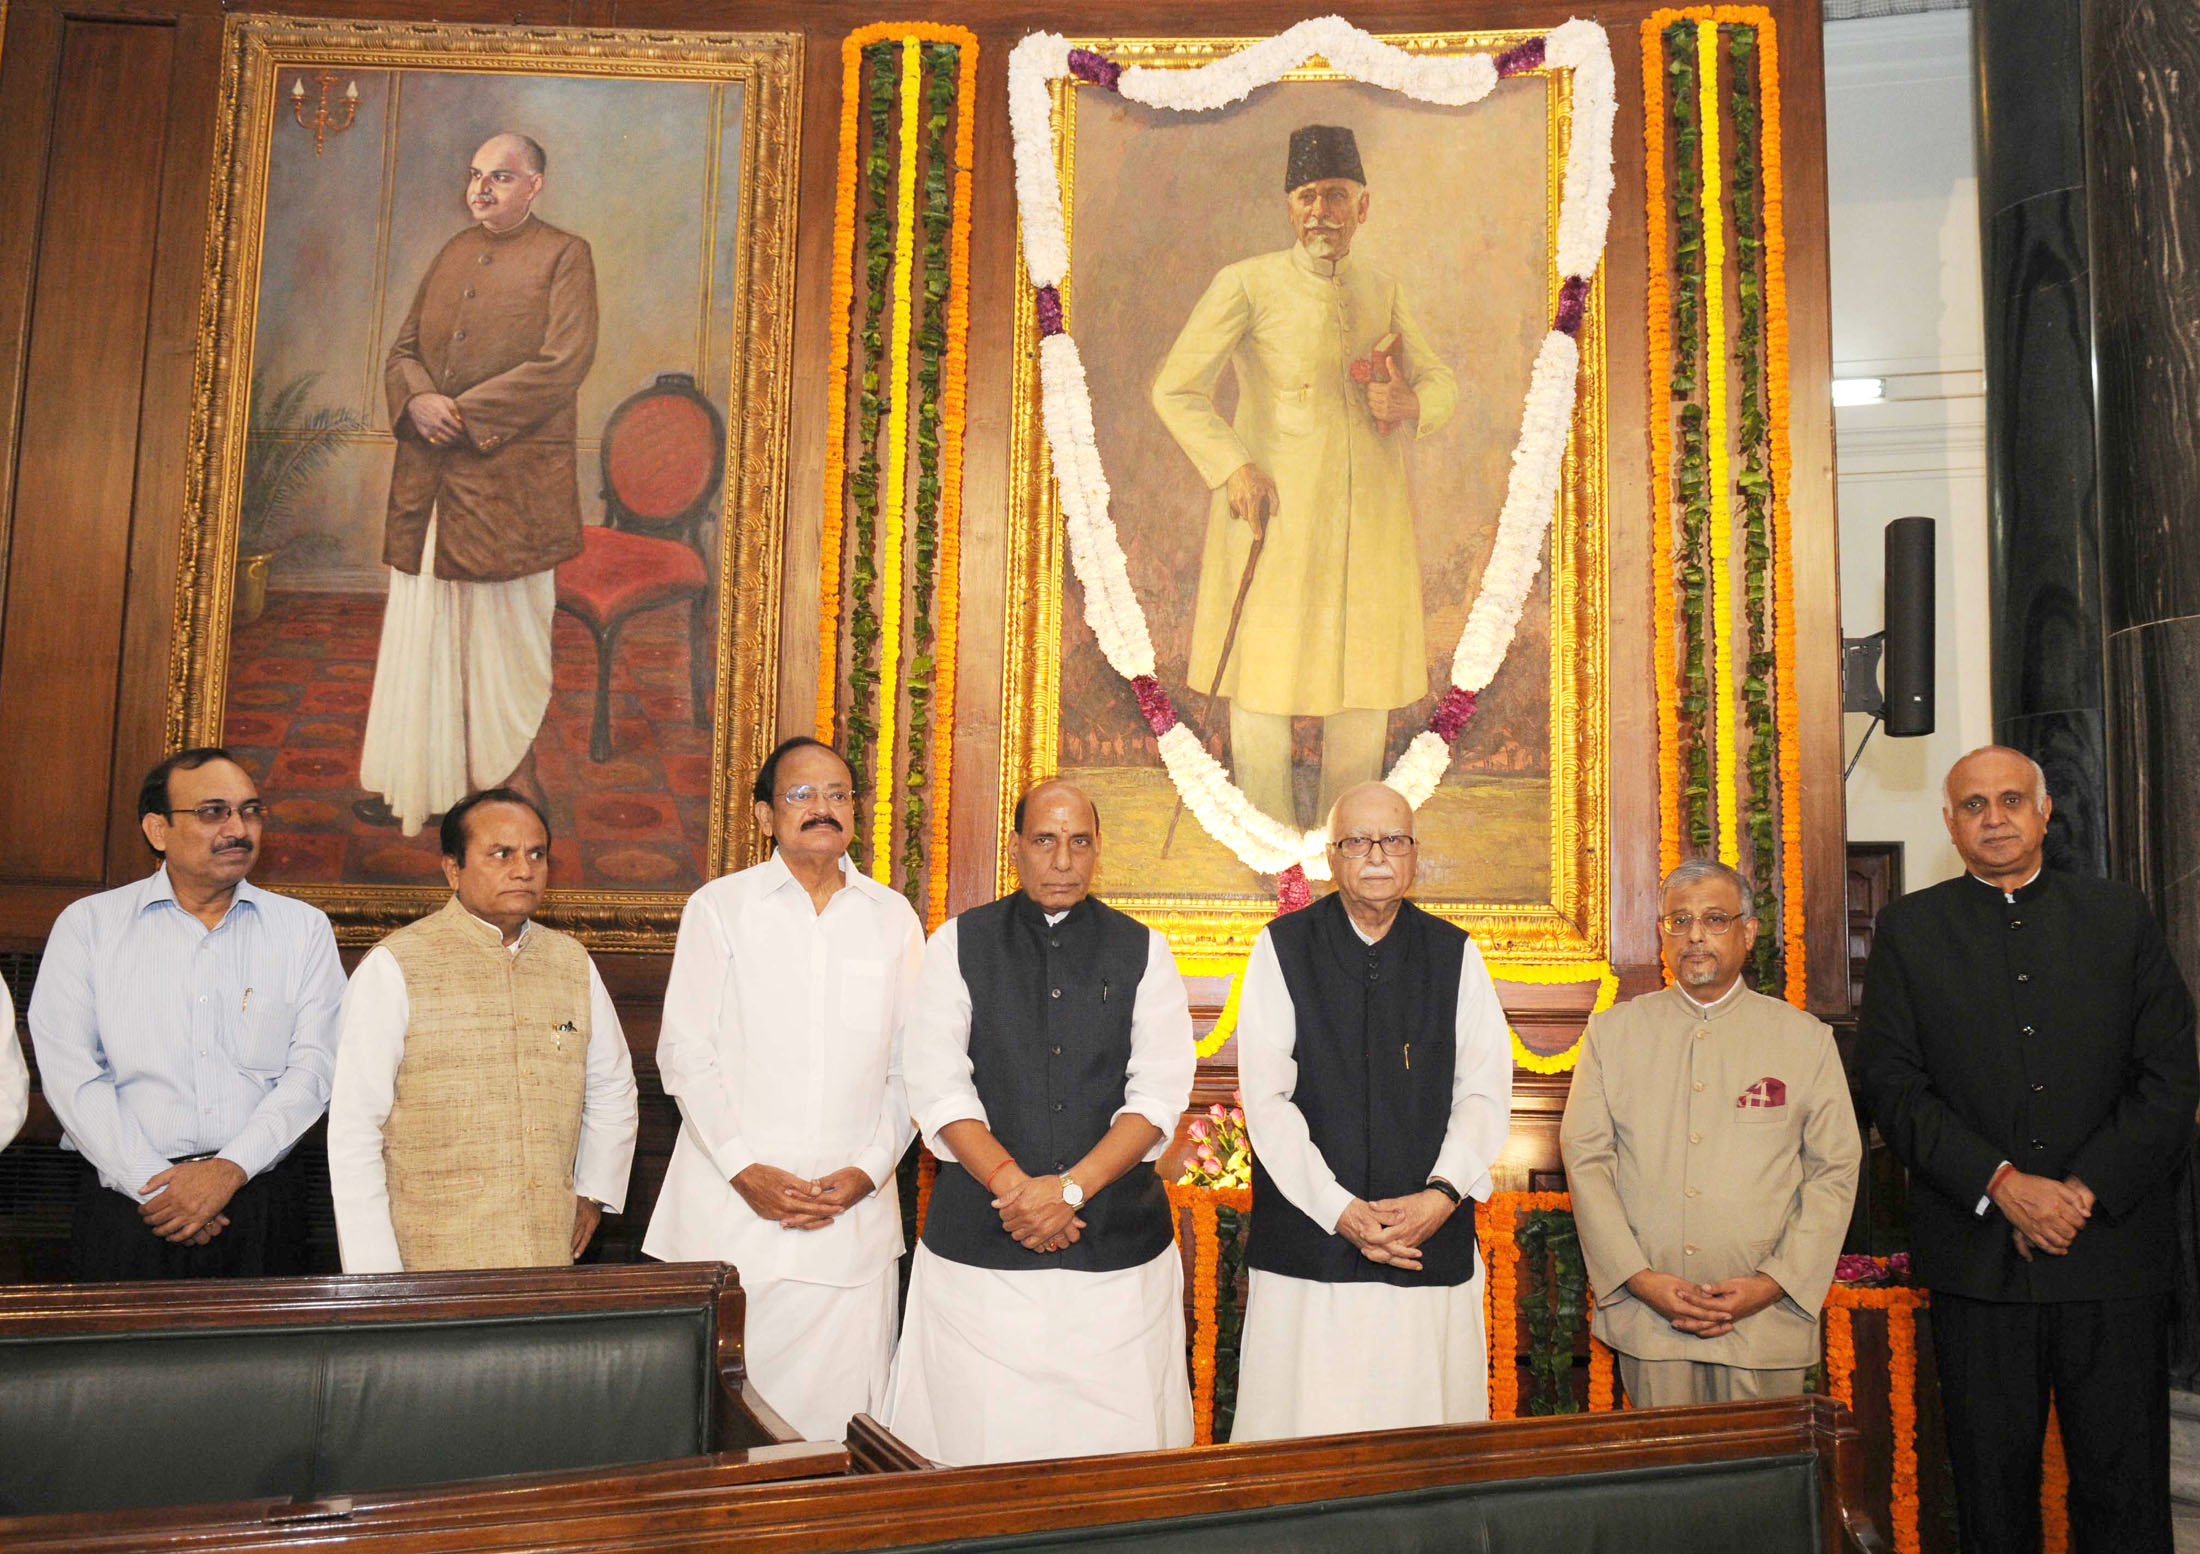 The Union Home Minister, Shri Rajnath Singh, the Union Minister for Urban Development, Housing and Urban Poverty Alleviation and Parliamentary Affairs, Shri M. Venkaiah Naidu and other dignitaries paid tributes to Maulana Abul Kalam Azad on the occasion of his birth anniversary, in New Delhi on November 11, 2015.